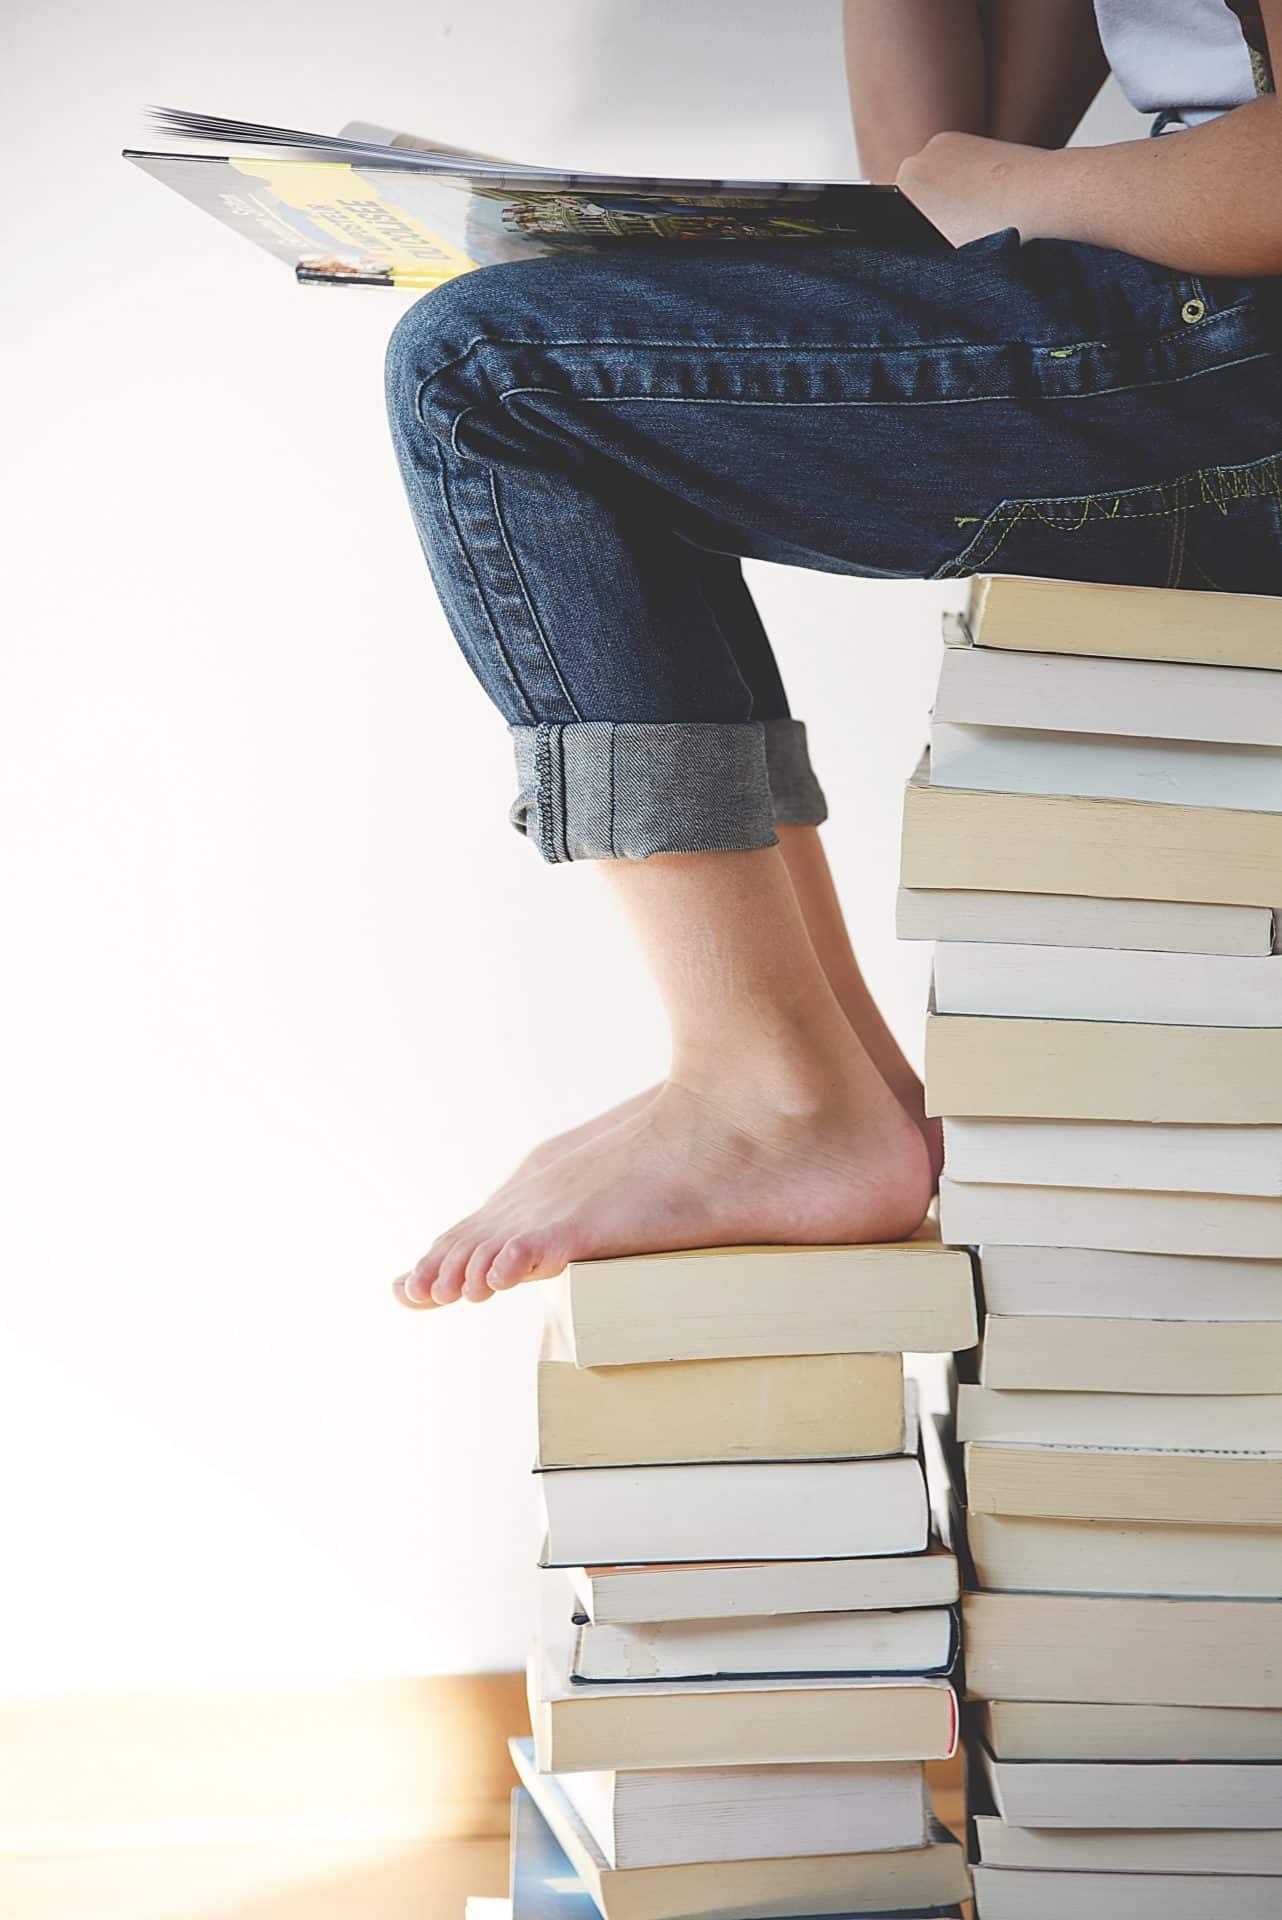 A persons legs. The person is sitting on lots of books stacked up